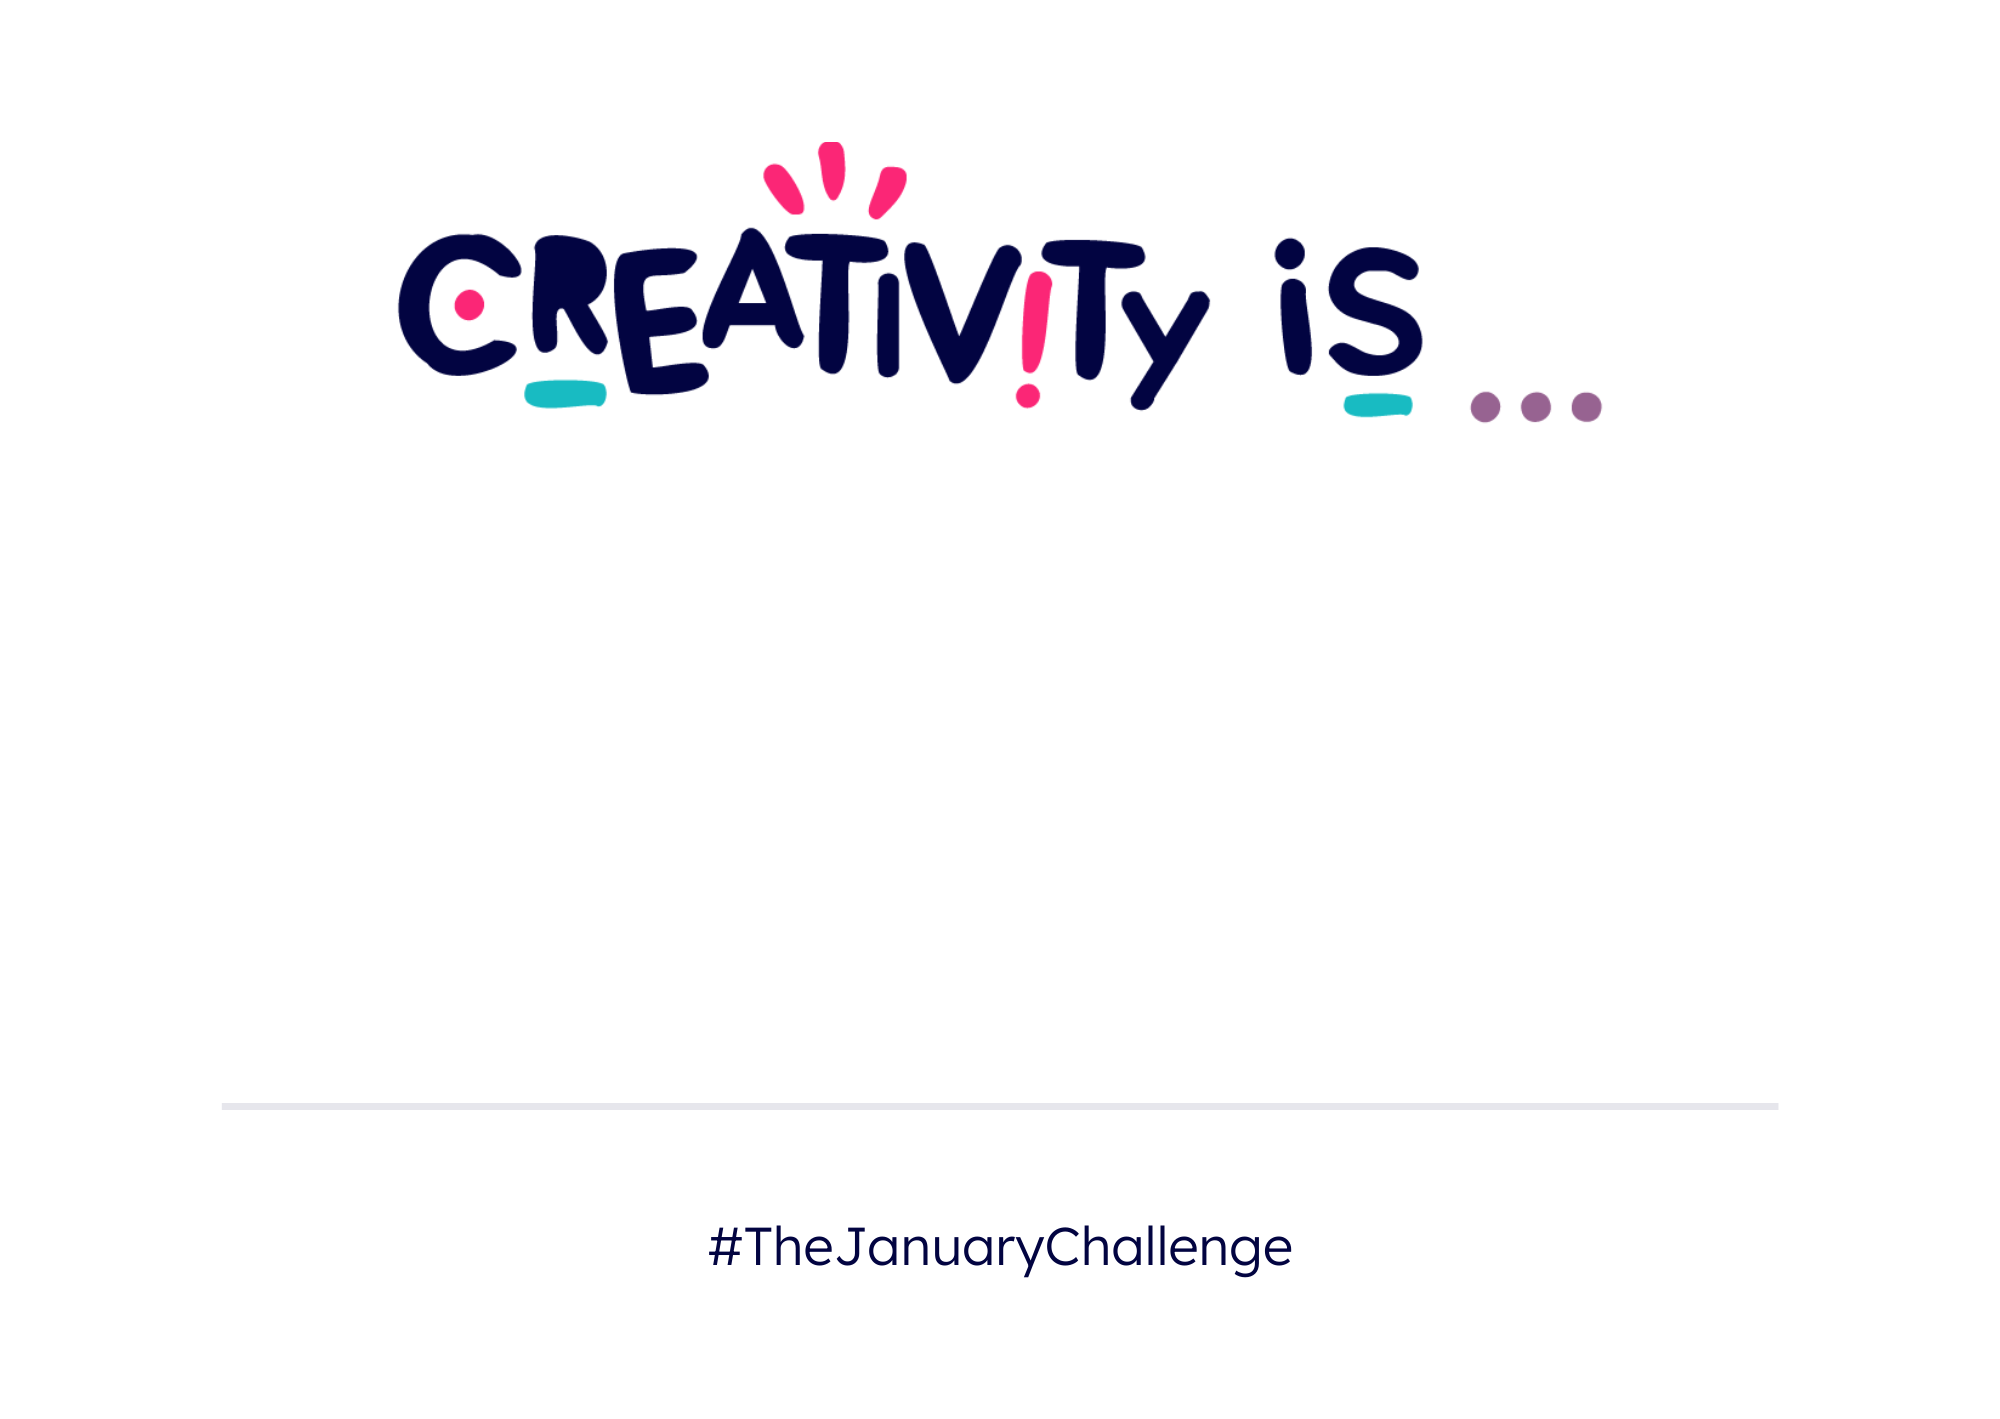 An A4 poster you can click and print that says 'Creativity is...' and let you write a word or words of your choice underneath